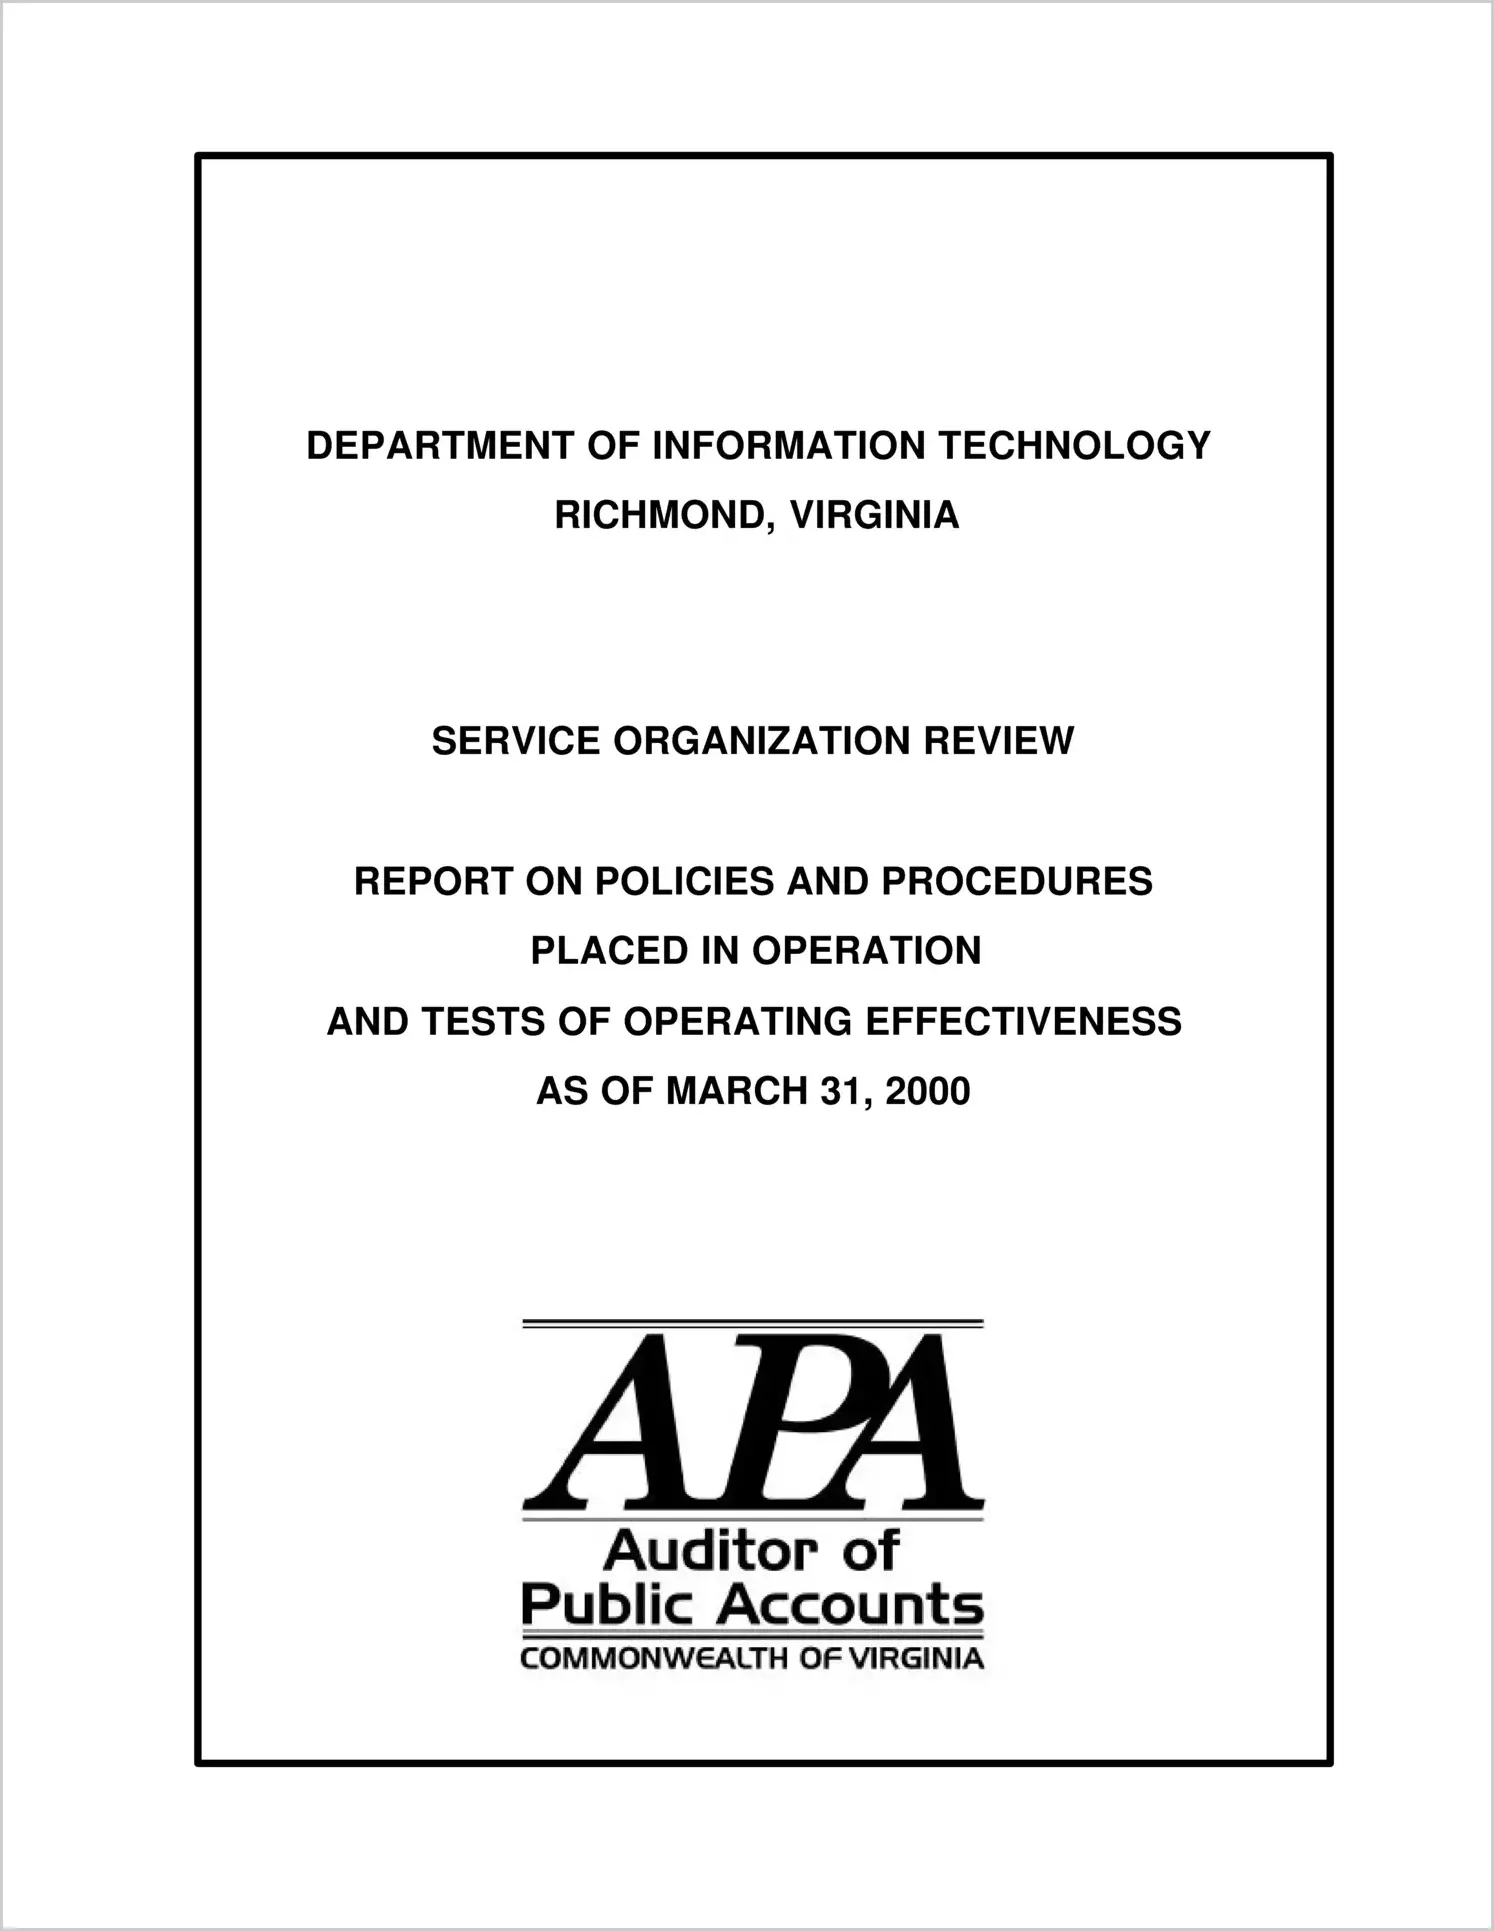 Special ReportDepartment of Information Technology, Service Organization Review, Report on Policies and Procedures Placed in Operation and Tests of Operating Effectiveness as of March 31, 2000(Report Date: 3/31/2000)